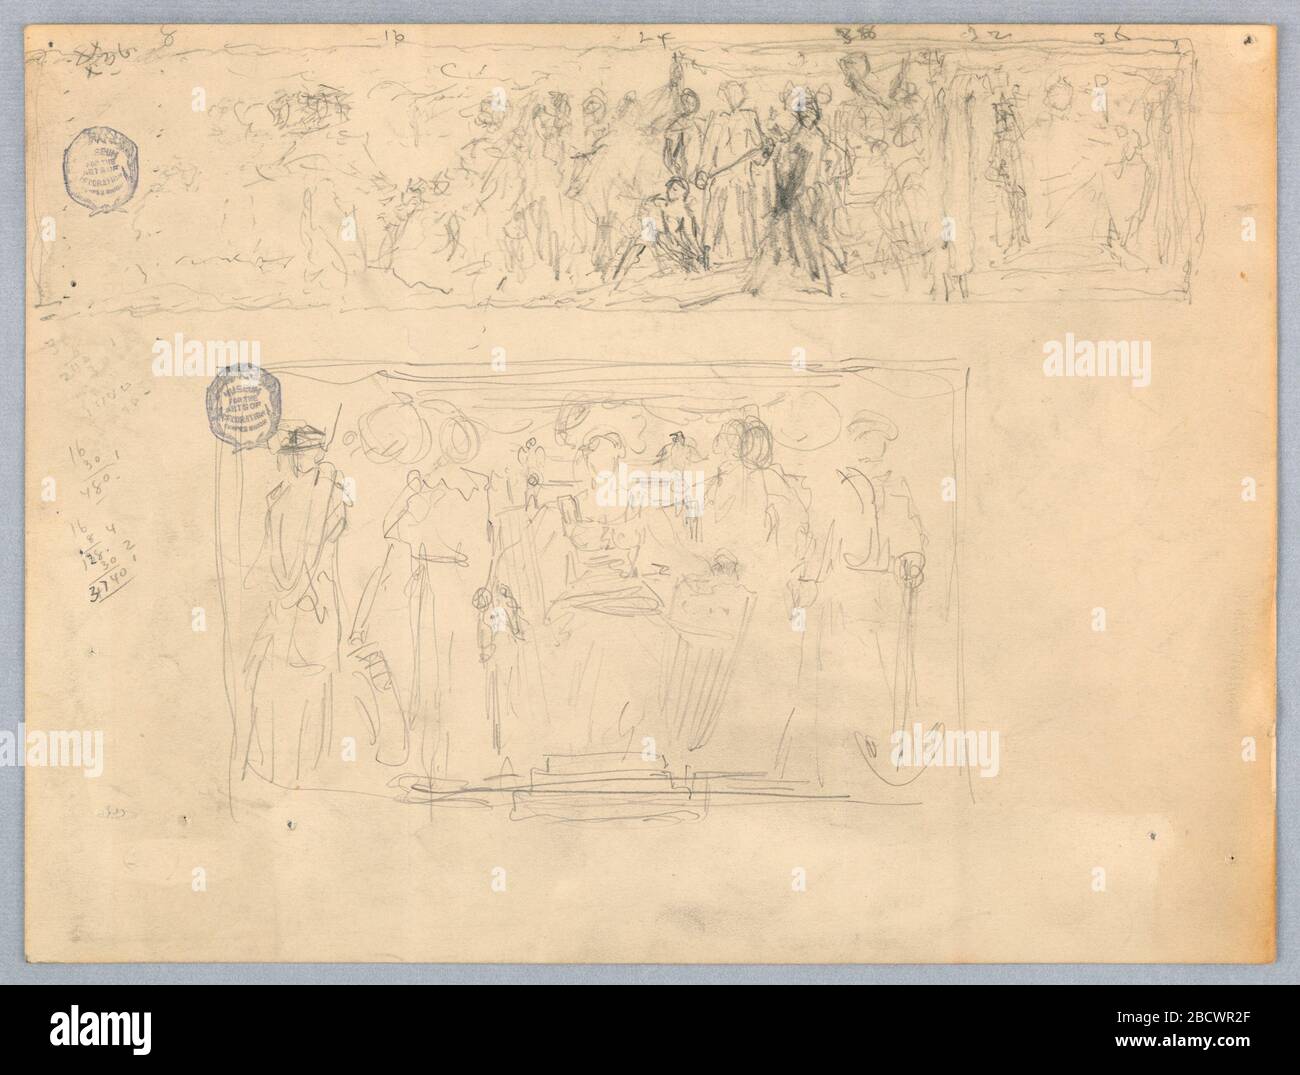 Two Sketches for a Wall Mural. Research in ProgressTwo horiztonal rectangular compositions. Above, enthroned figure at right, many figures to the left, with notes on sizes. Below, female figure seated with two standing figures on either side. Two Sketches for a Wall Mural Stock Photo